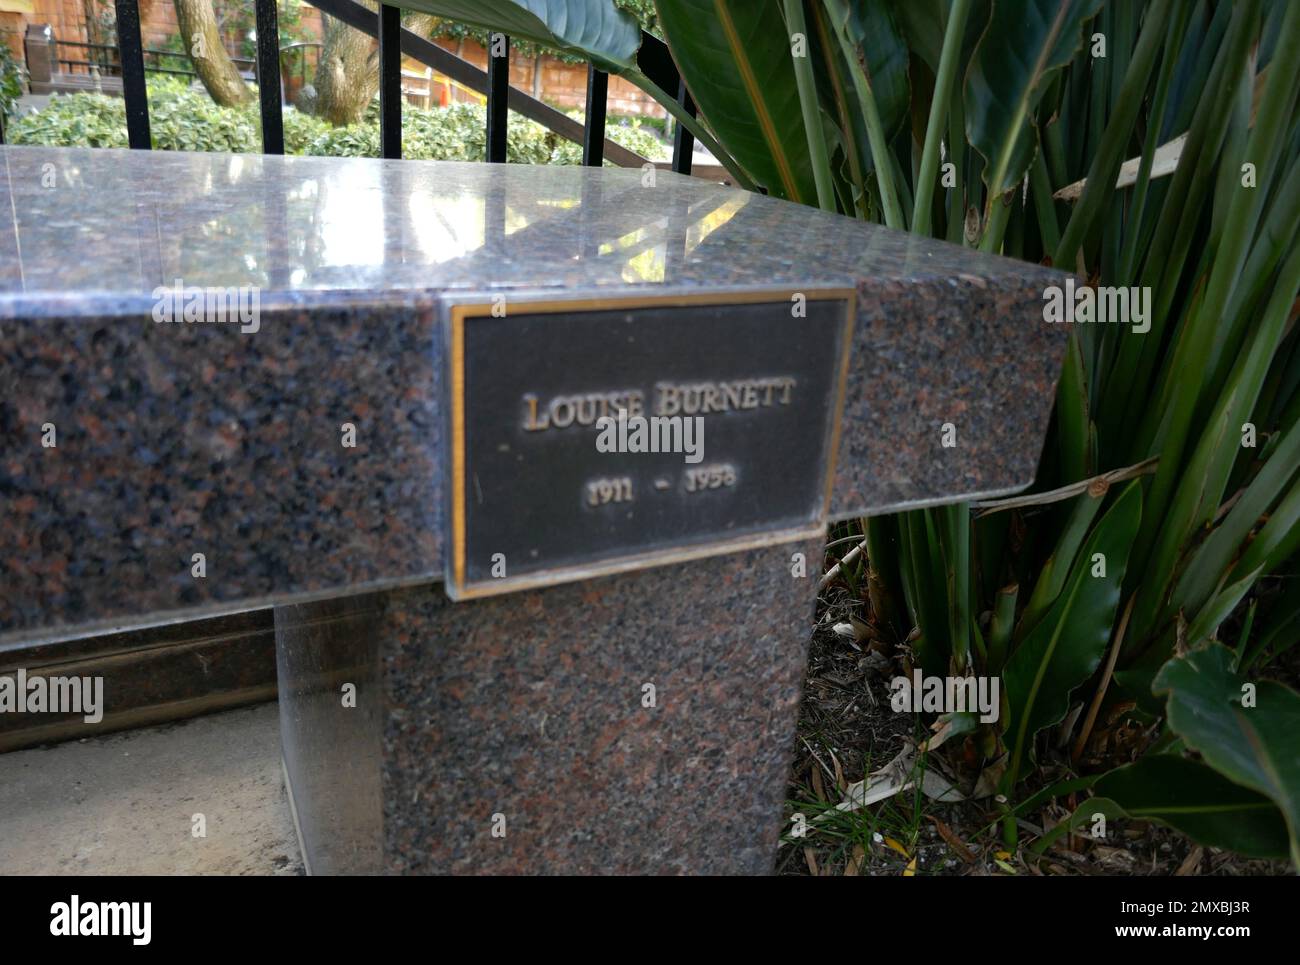 Los Angeles, California, USA 31st January 2023 A general view of atmosphere of Louise Burnett's Grave at Pierce Brothers Westwood Village Memorial Park Cemetery on January 31, 2023 in Los Angeles, California, USA. Photo by Barry King/Alamy Stock Photo Stock Photo